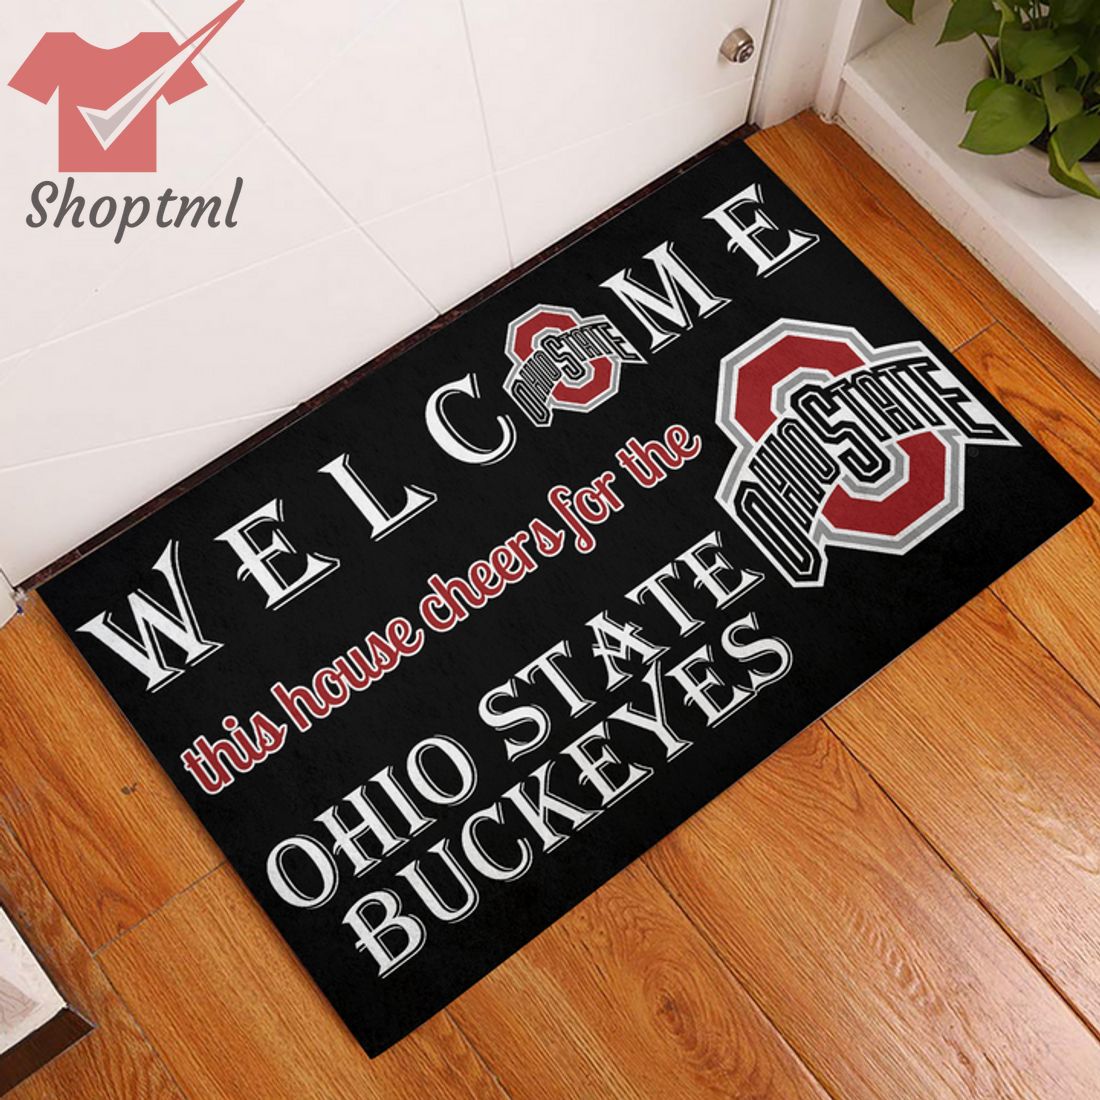 Welcome This House Cheers For The Ohio State Buckeyes Doormat